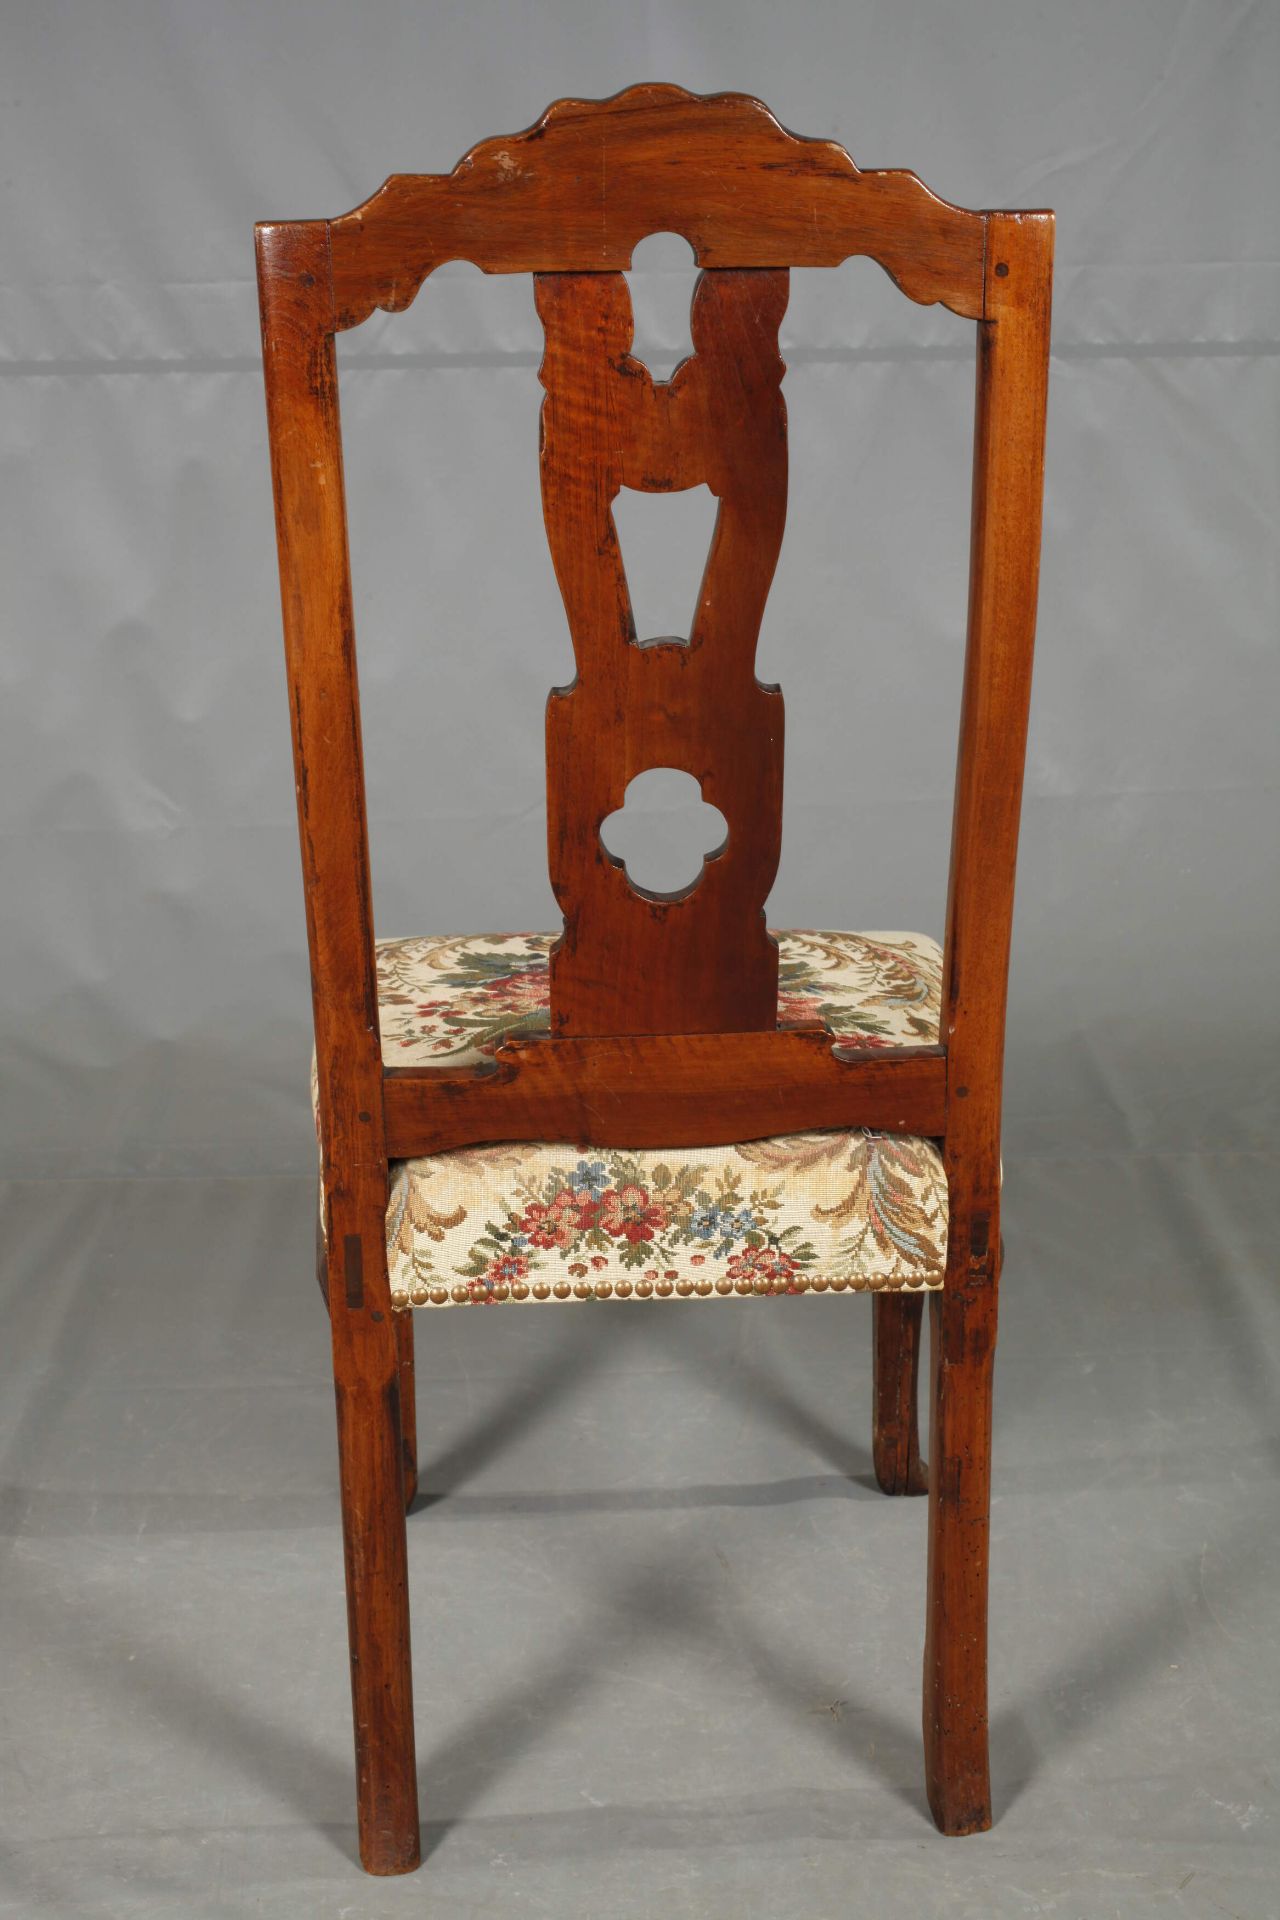 Baroque chair - Image 5 of 6